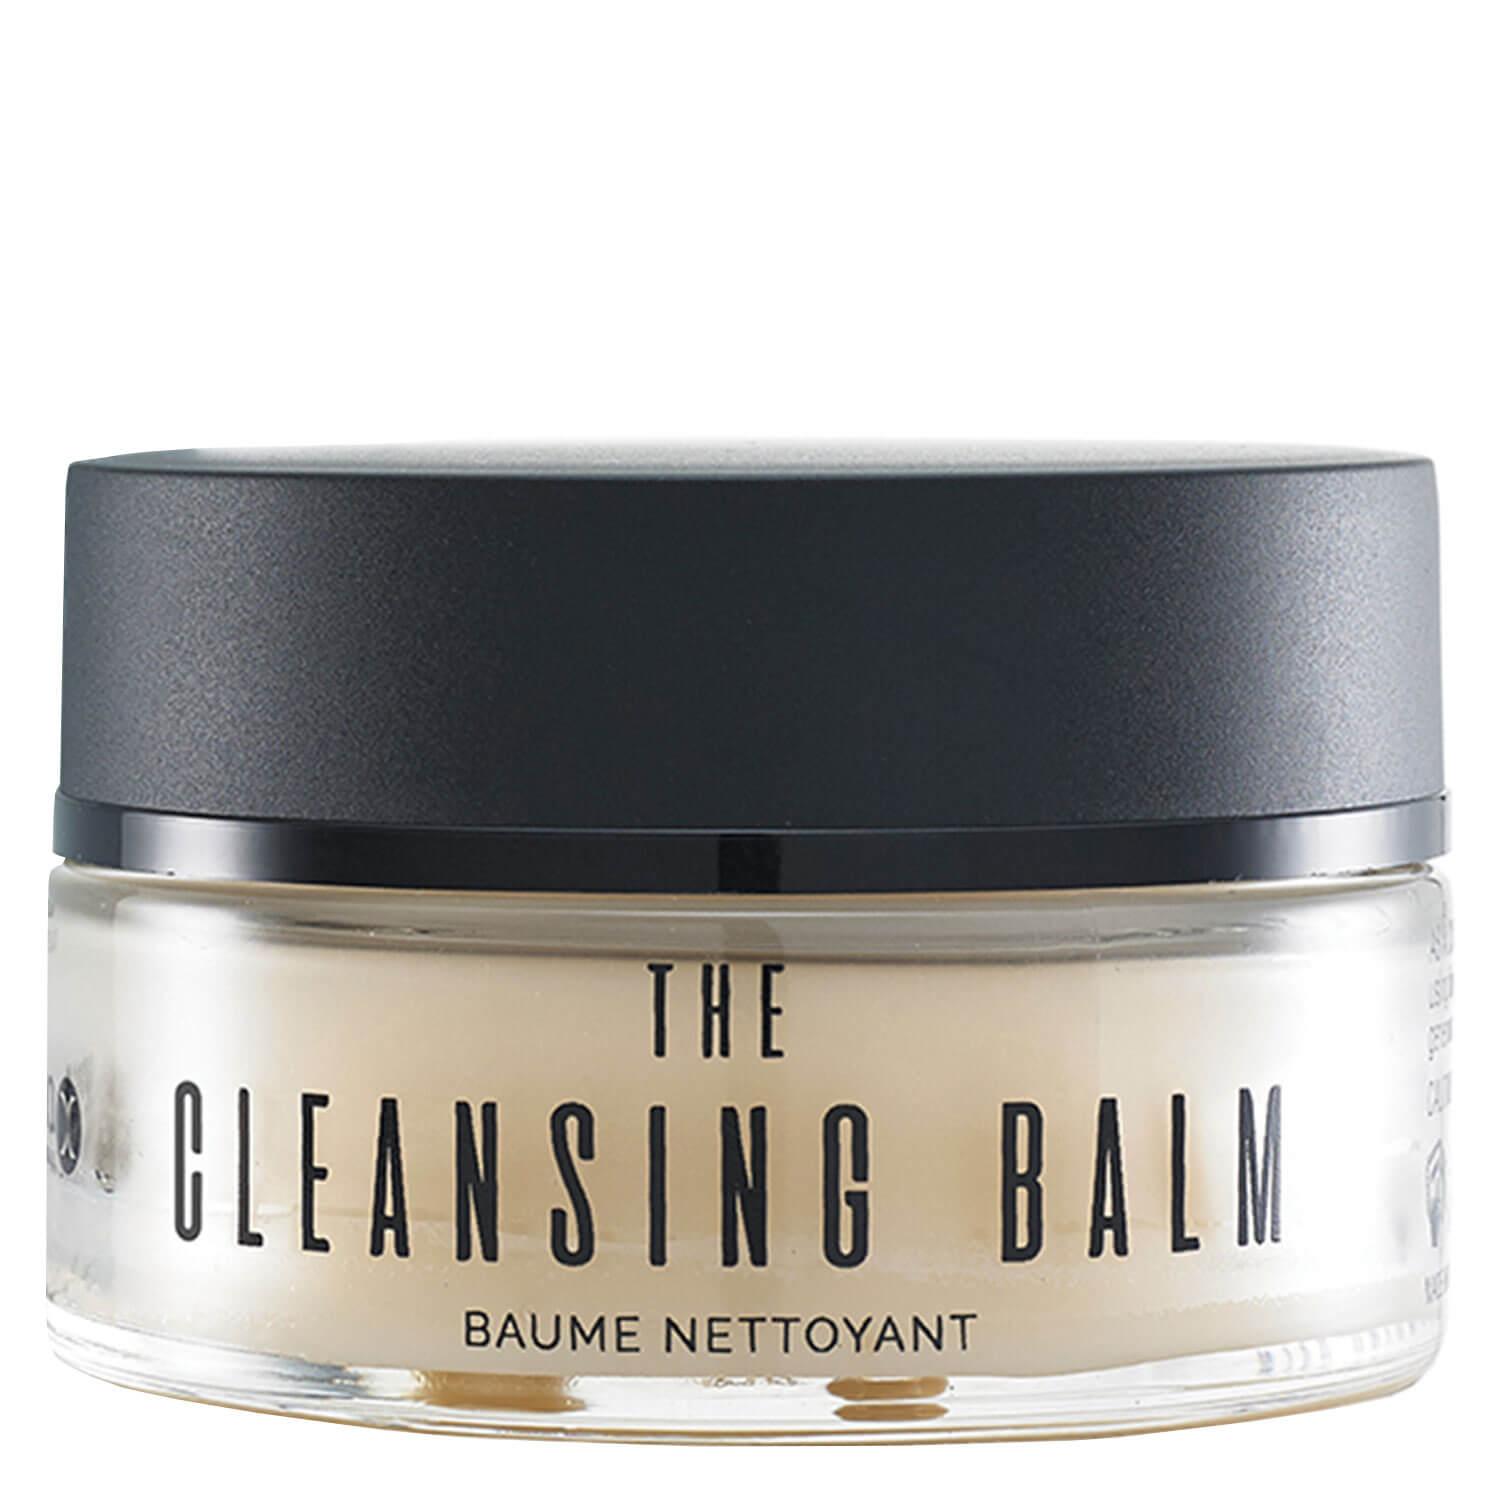 sienna x - The Cleansing Balm